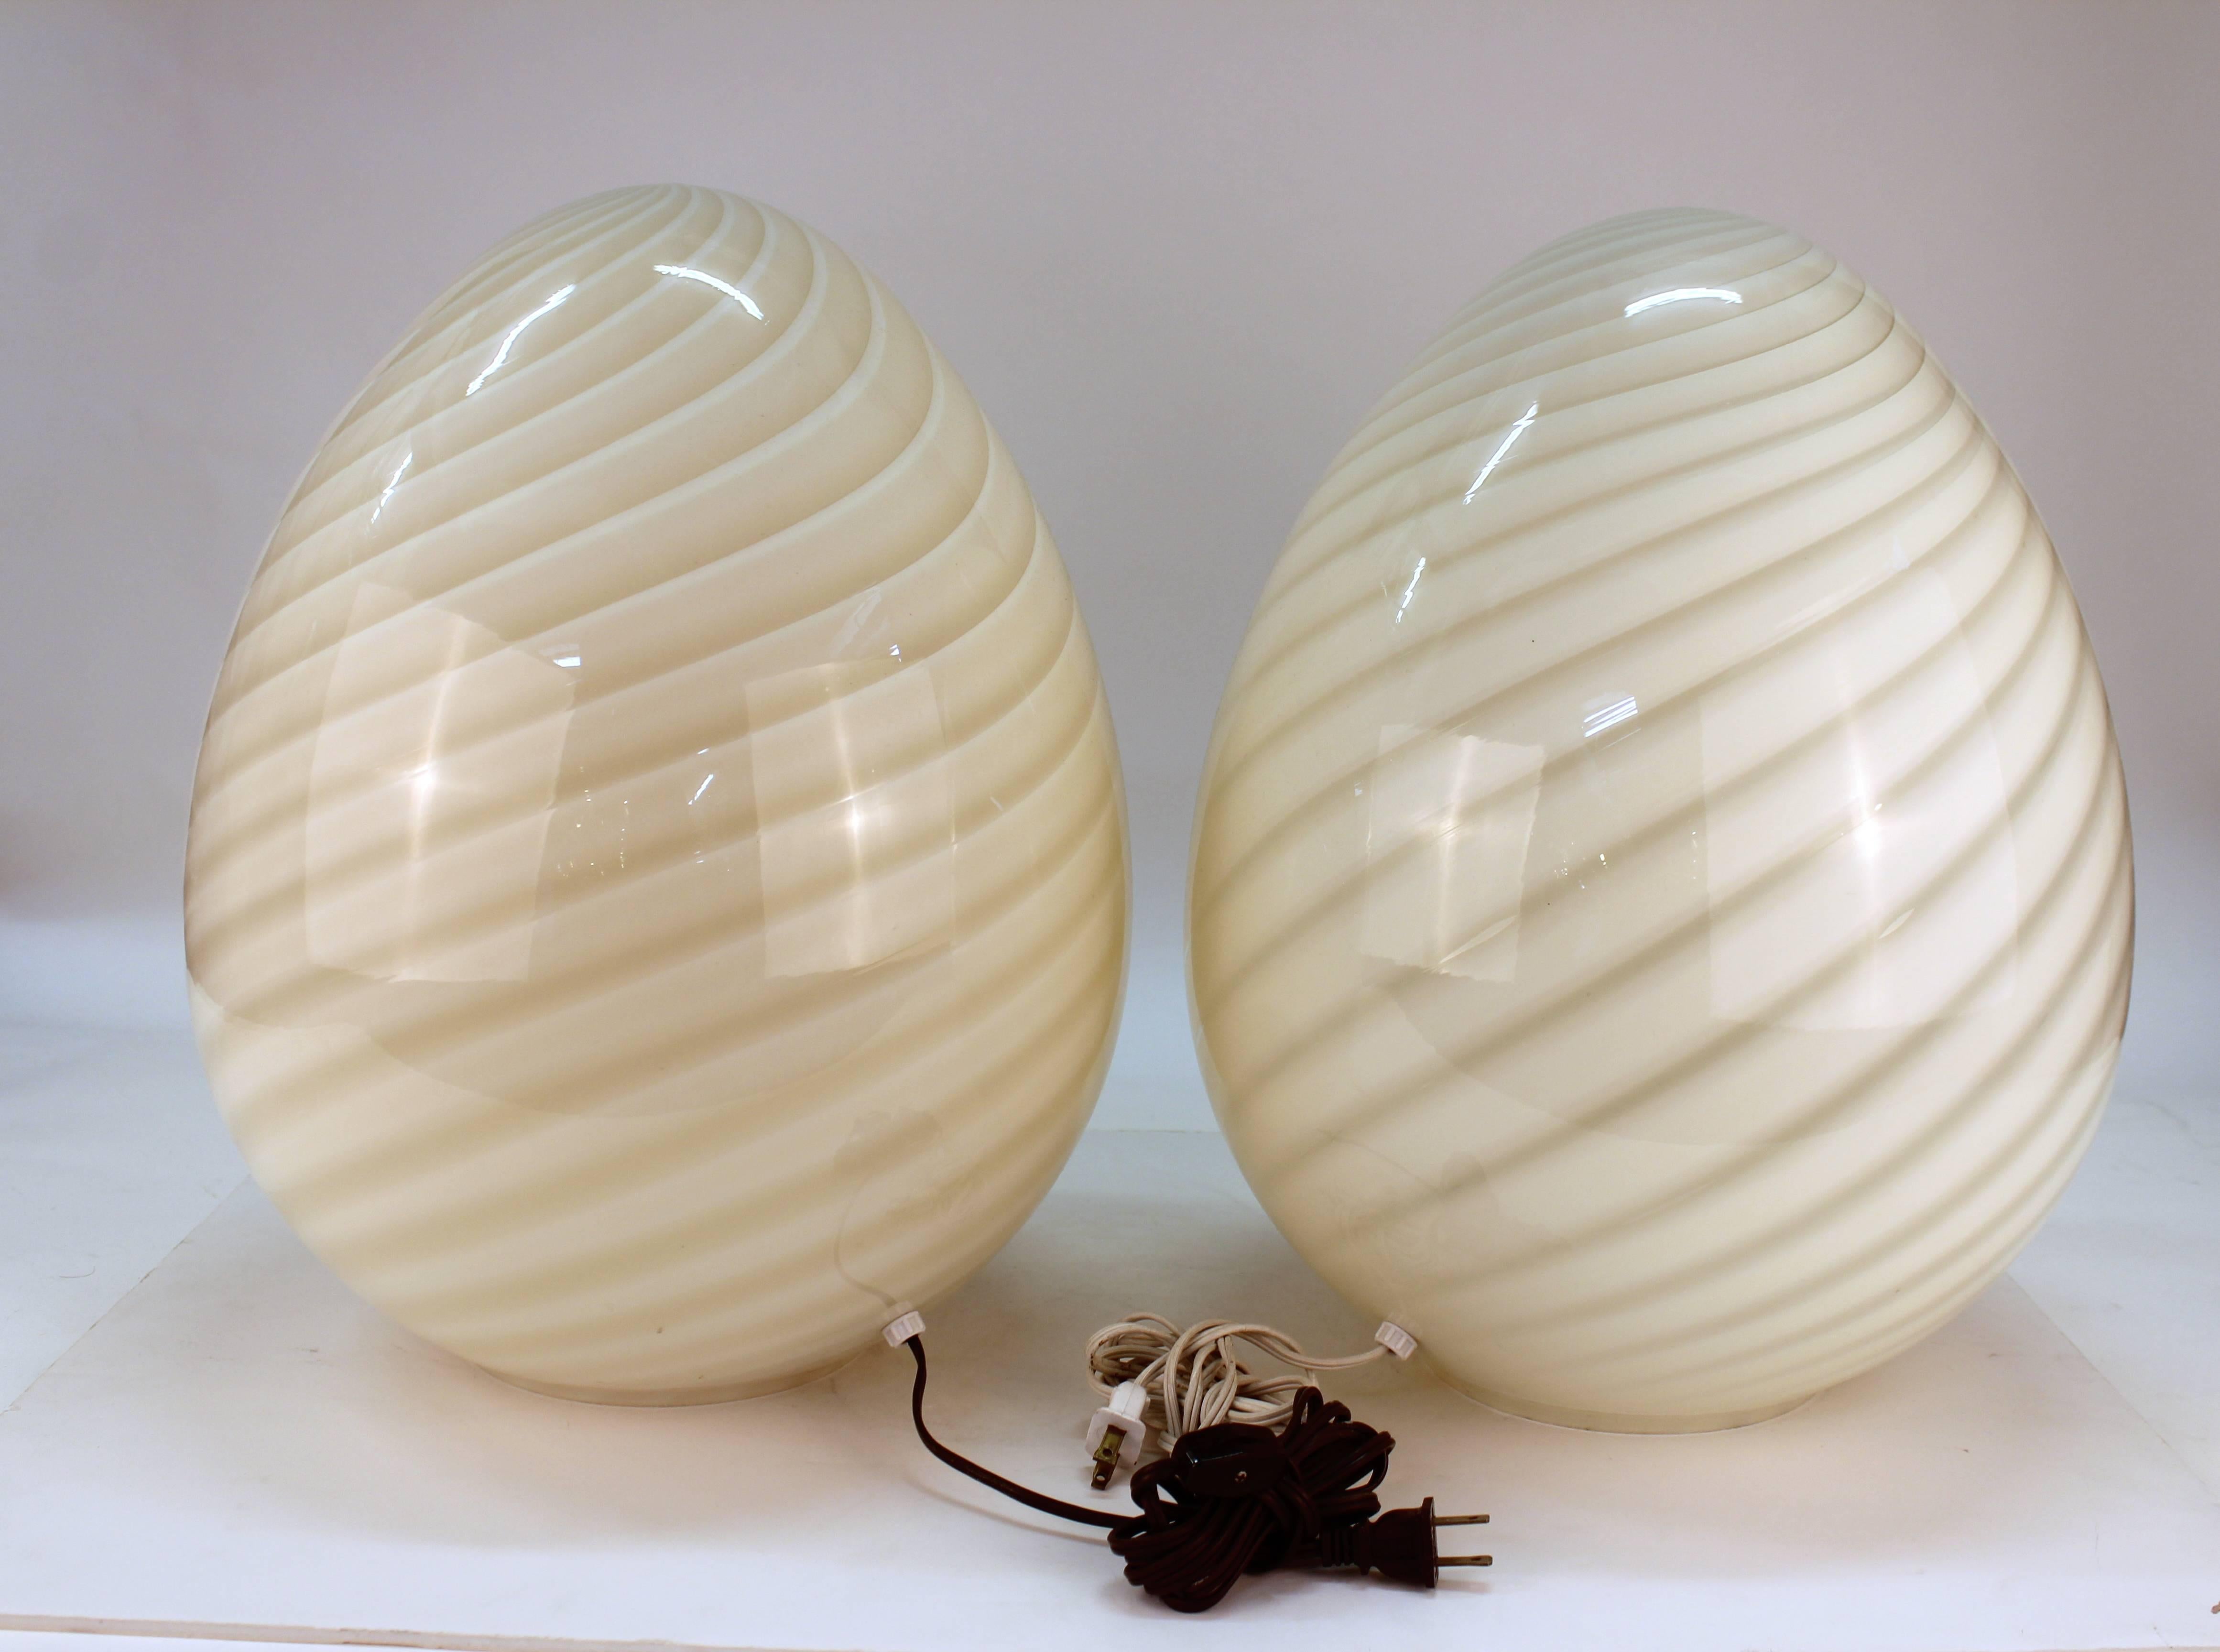 A vintage pair of egg-shaped table lamps in Italian Murano glass with a swirled pattern by Vetri. Both have their original label.